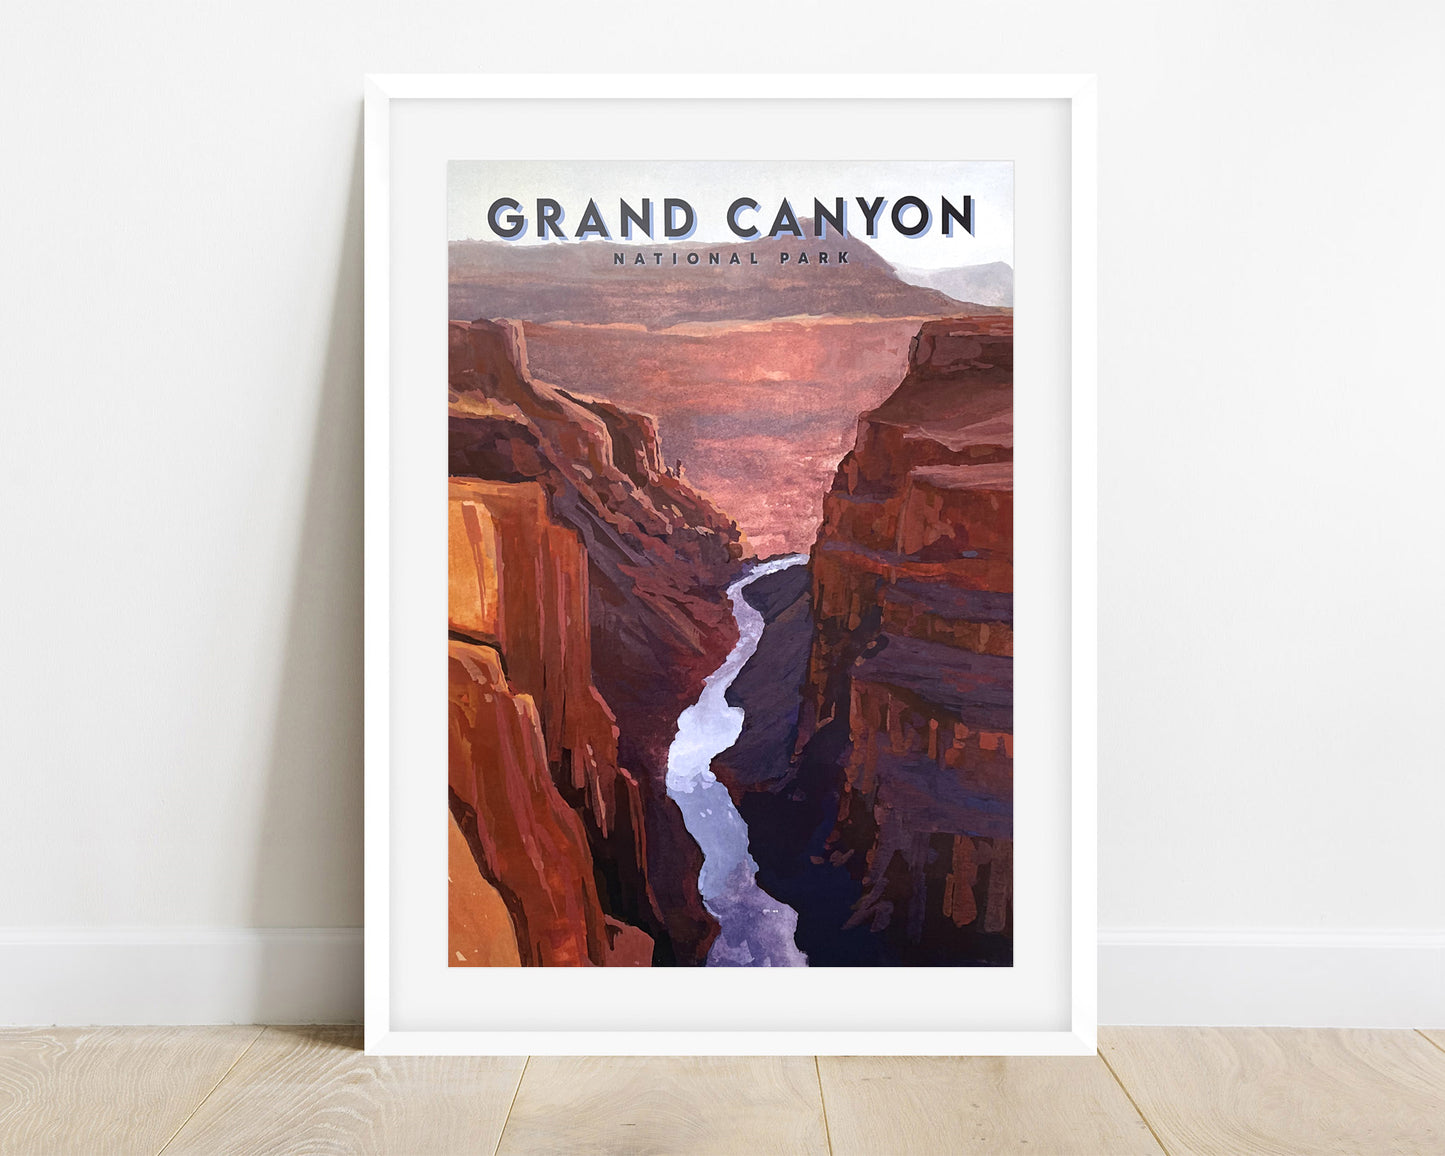 'Grand Canyon' National Park Travel Poster